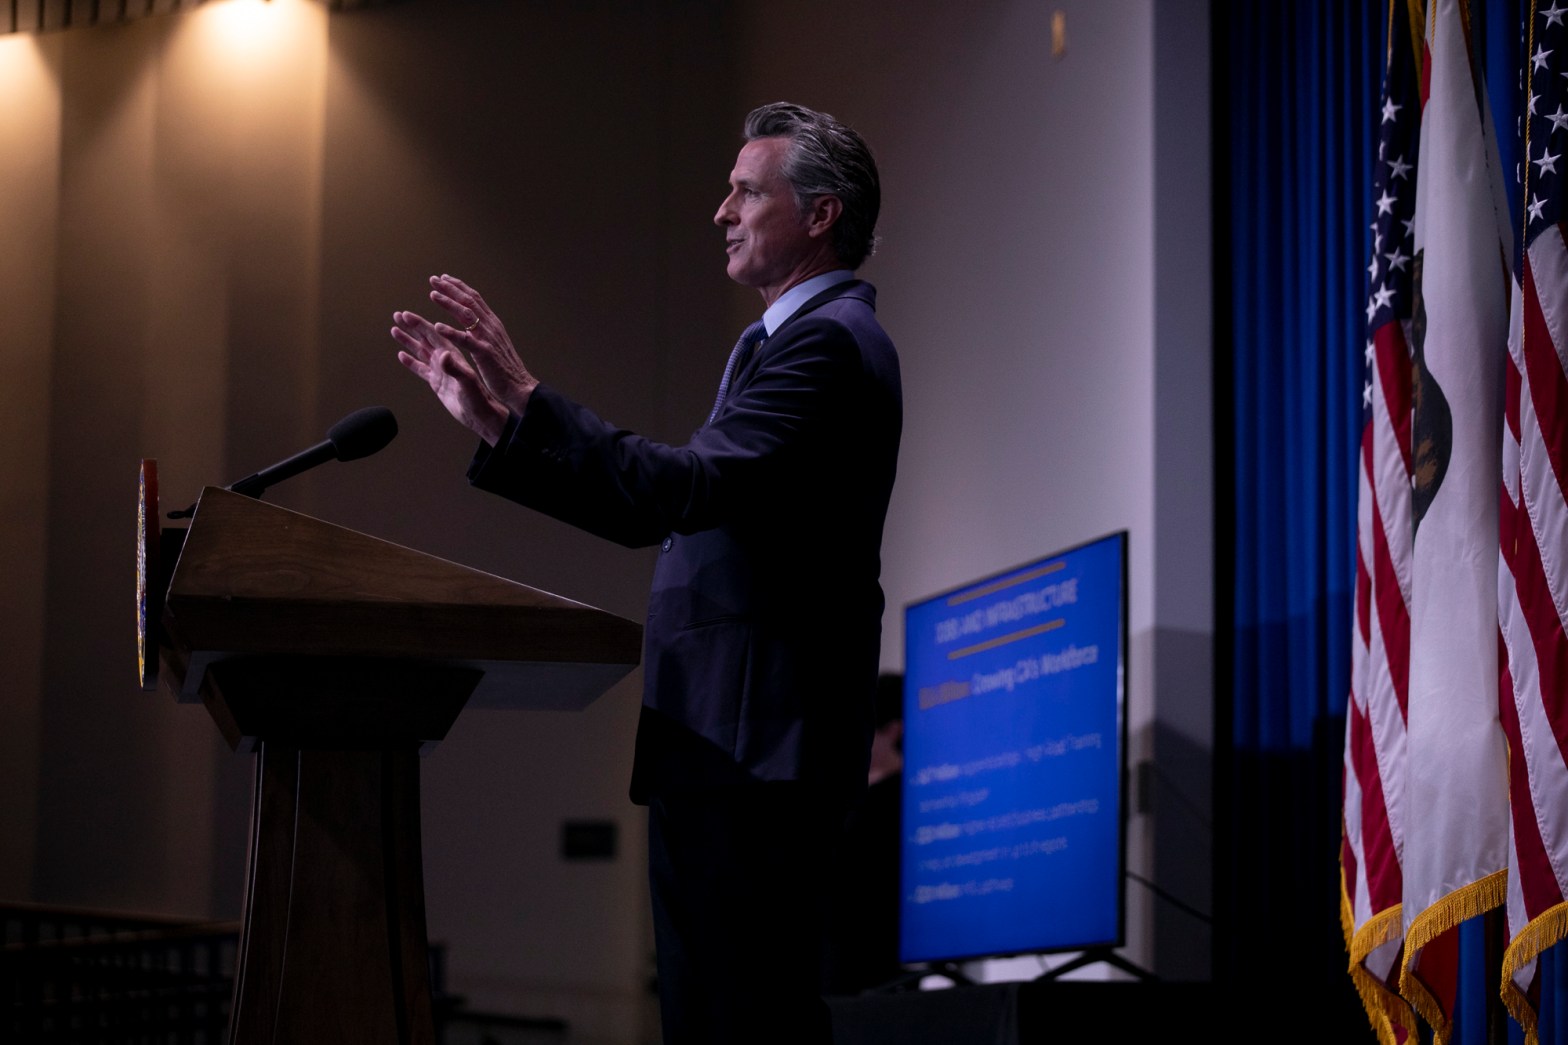 Gov. Gavin Newsom presents the breakdown for his revised budget at the Secretary of State building auditorium in Sacramento on May 14, 2021. The proposal focused on education, housing and climate resiliency measures.